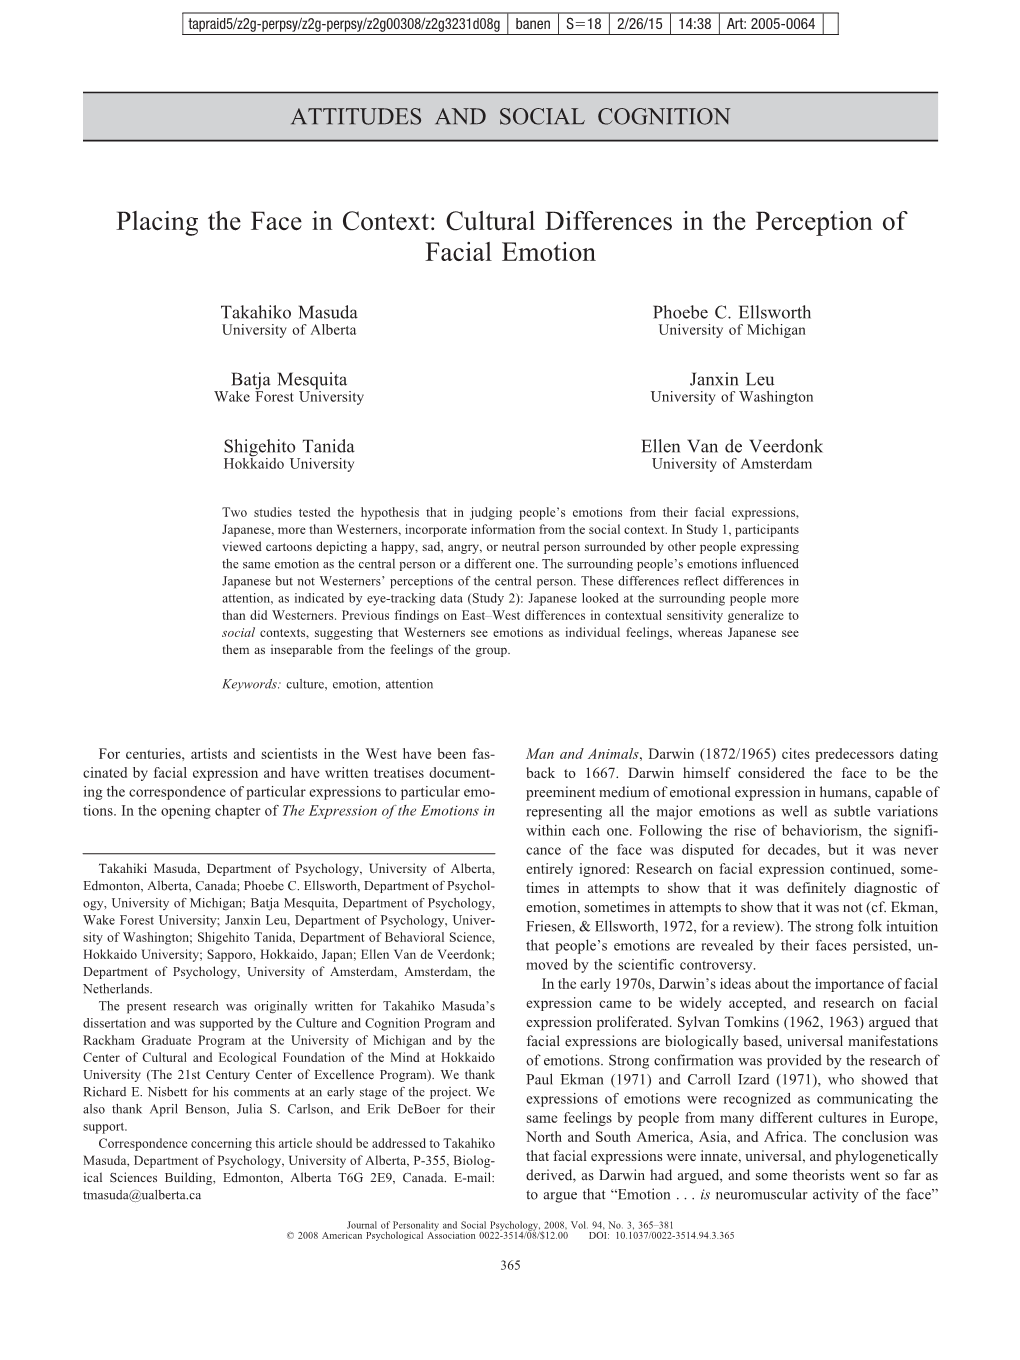 Cultural Differences in the Perception of Facial Emotion